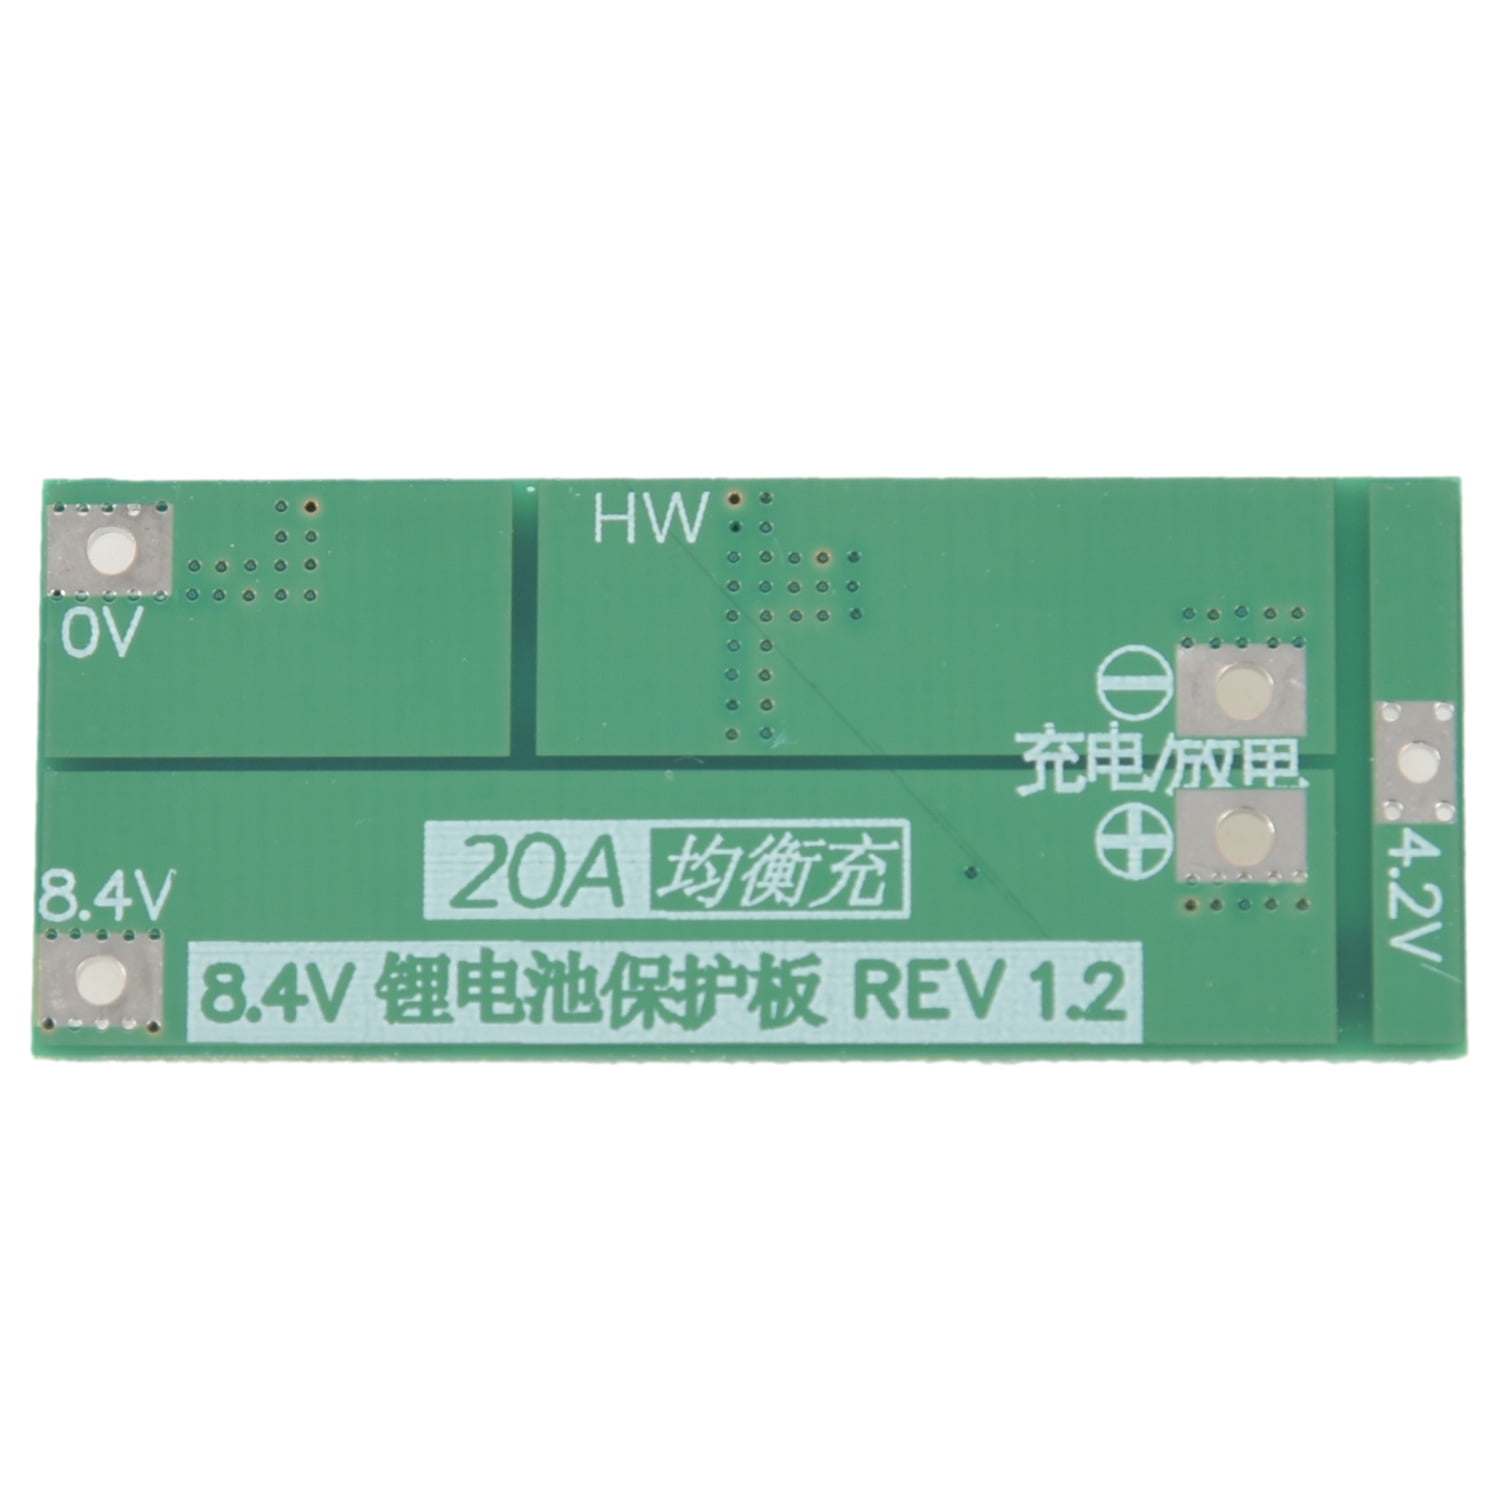 2S 20A 7.4V 8.4V Li-ion Lithium Battery 18650 Charger BMS PCB Protection Board 